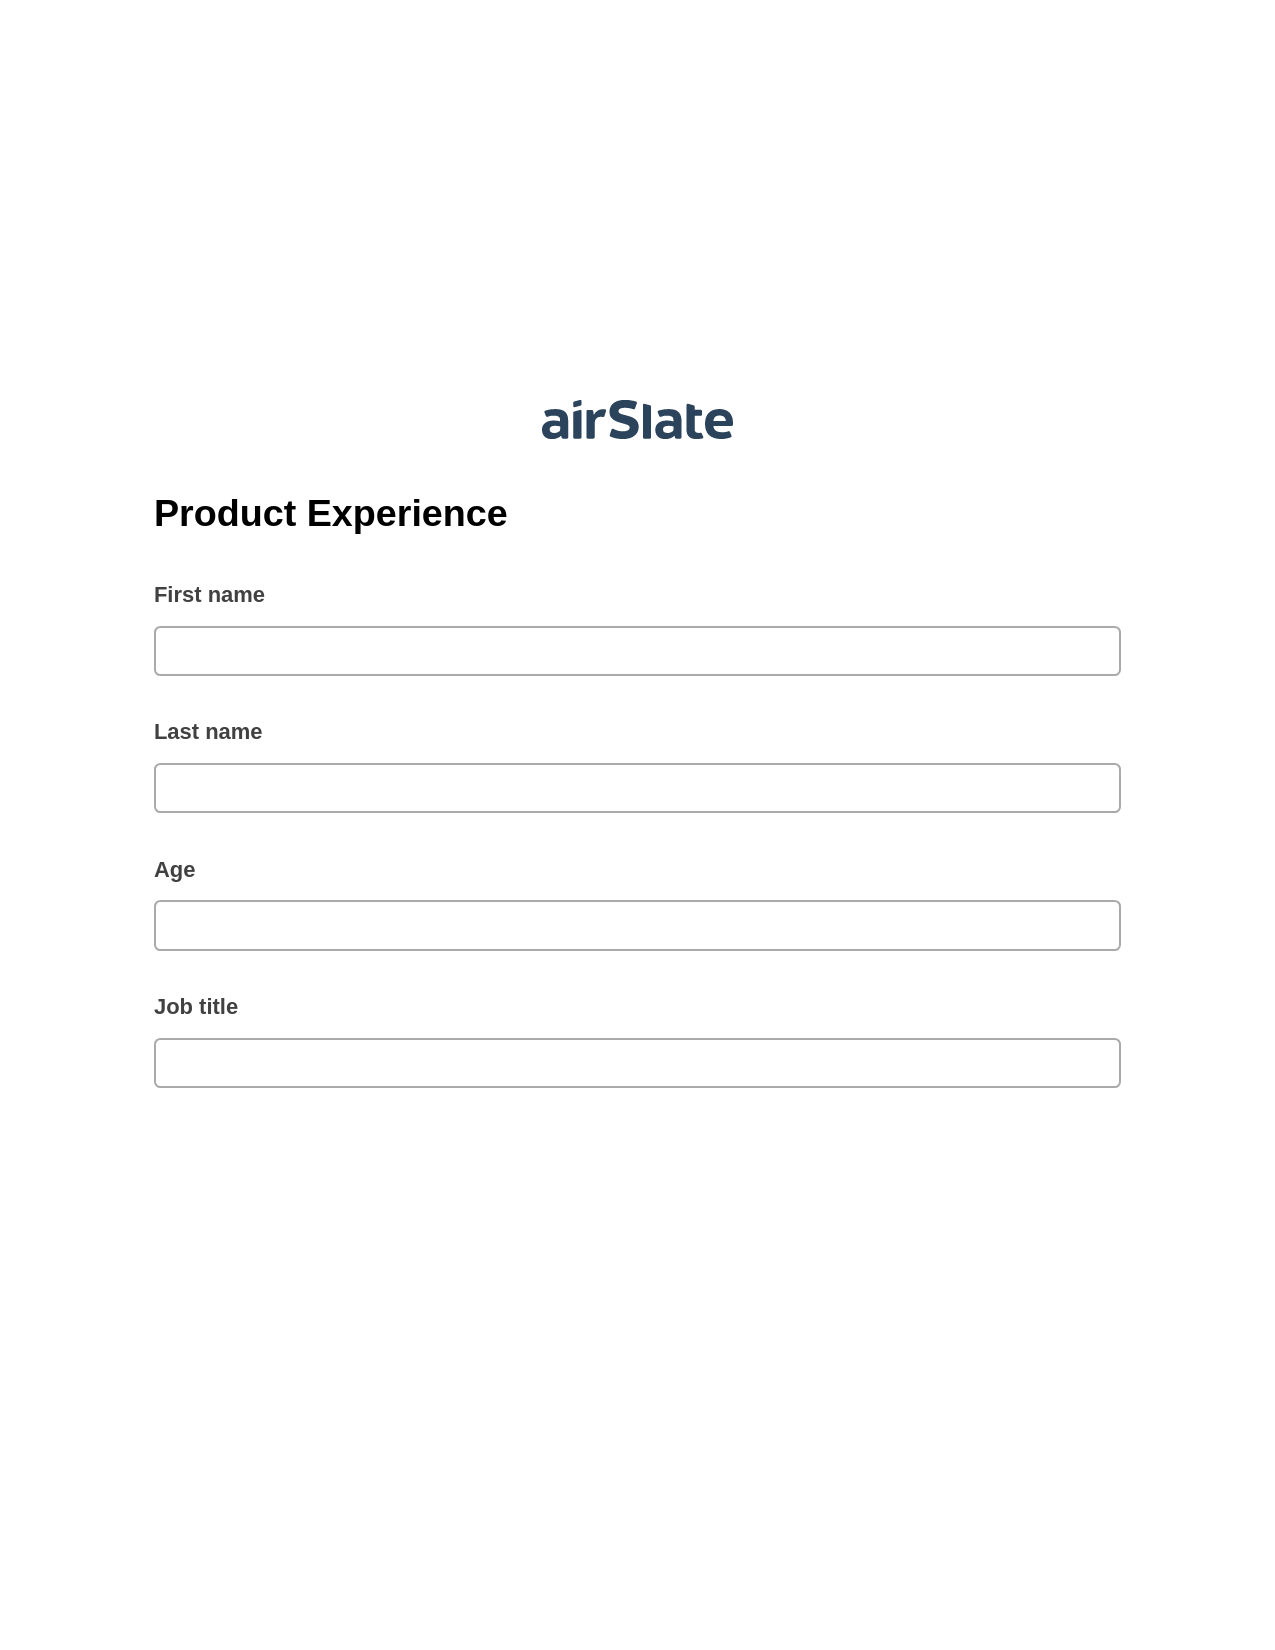 Product Experience Pre-fill from another Slate Bot, Create MS Dynamics 365 Records Bot, Export to WebMerge Bot